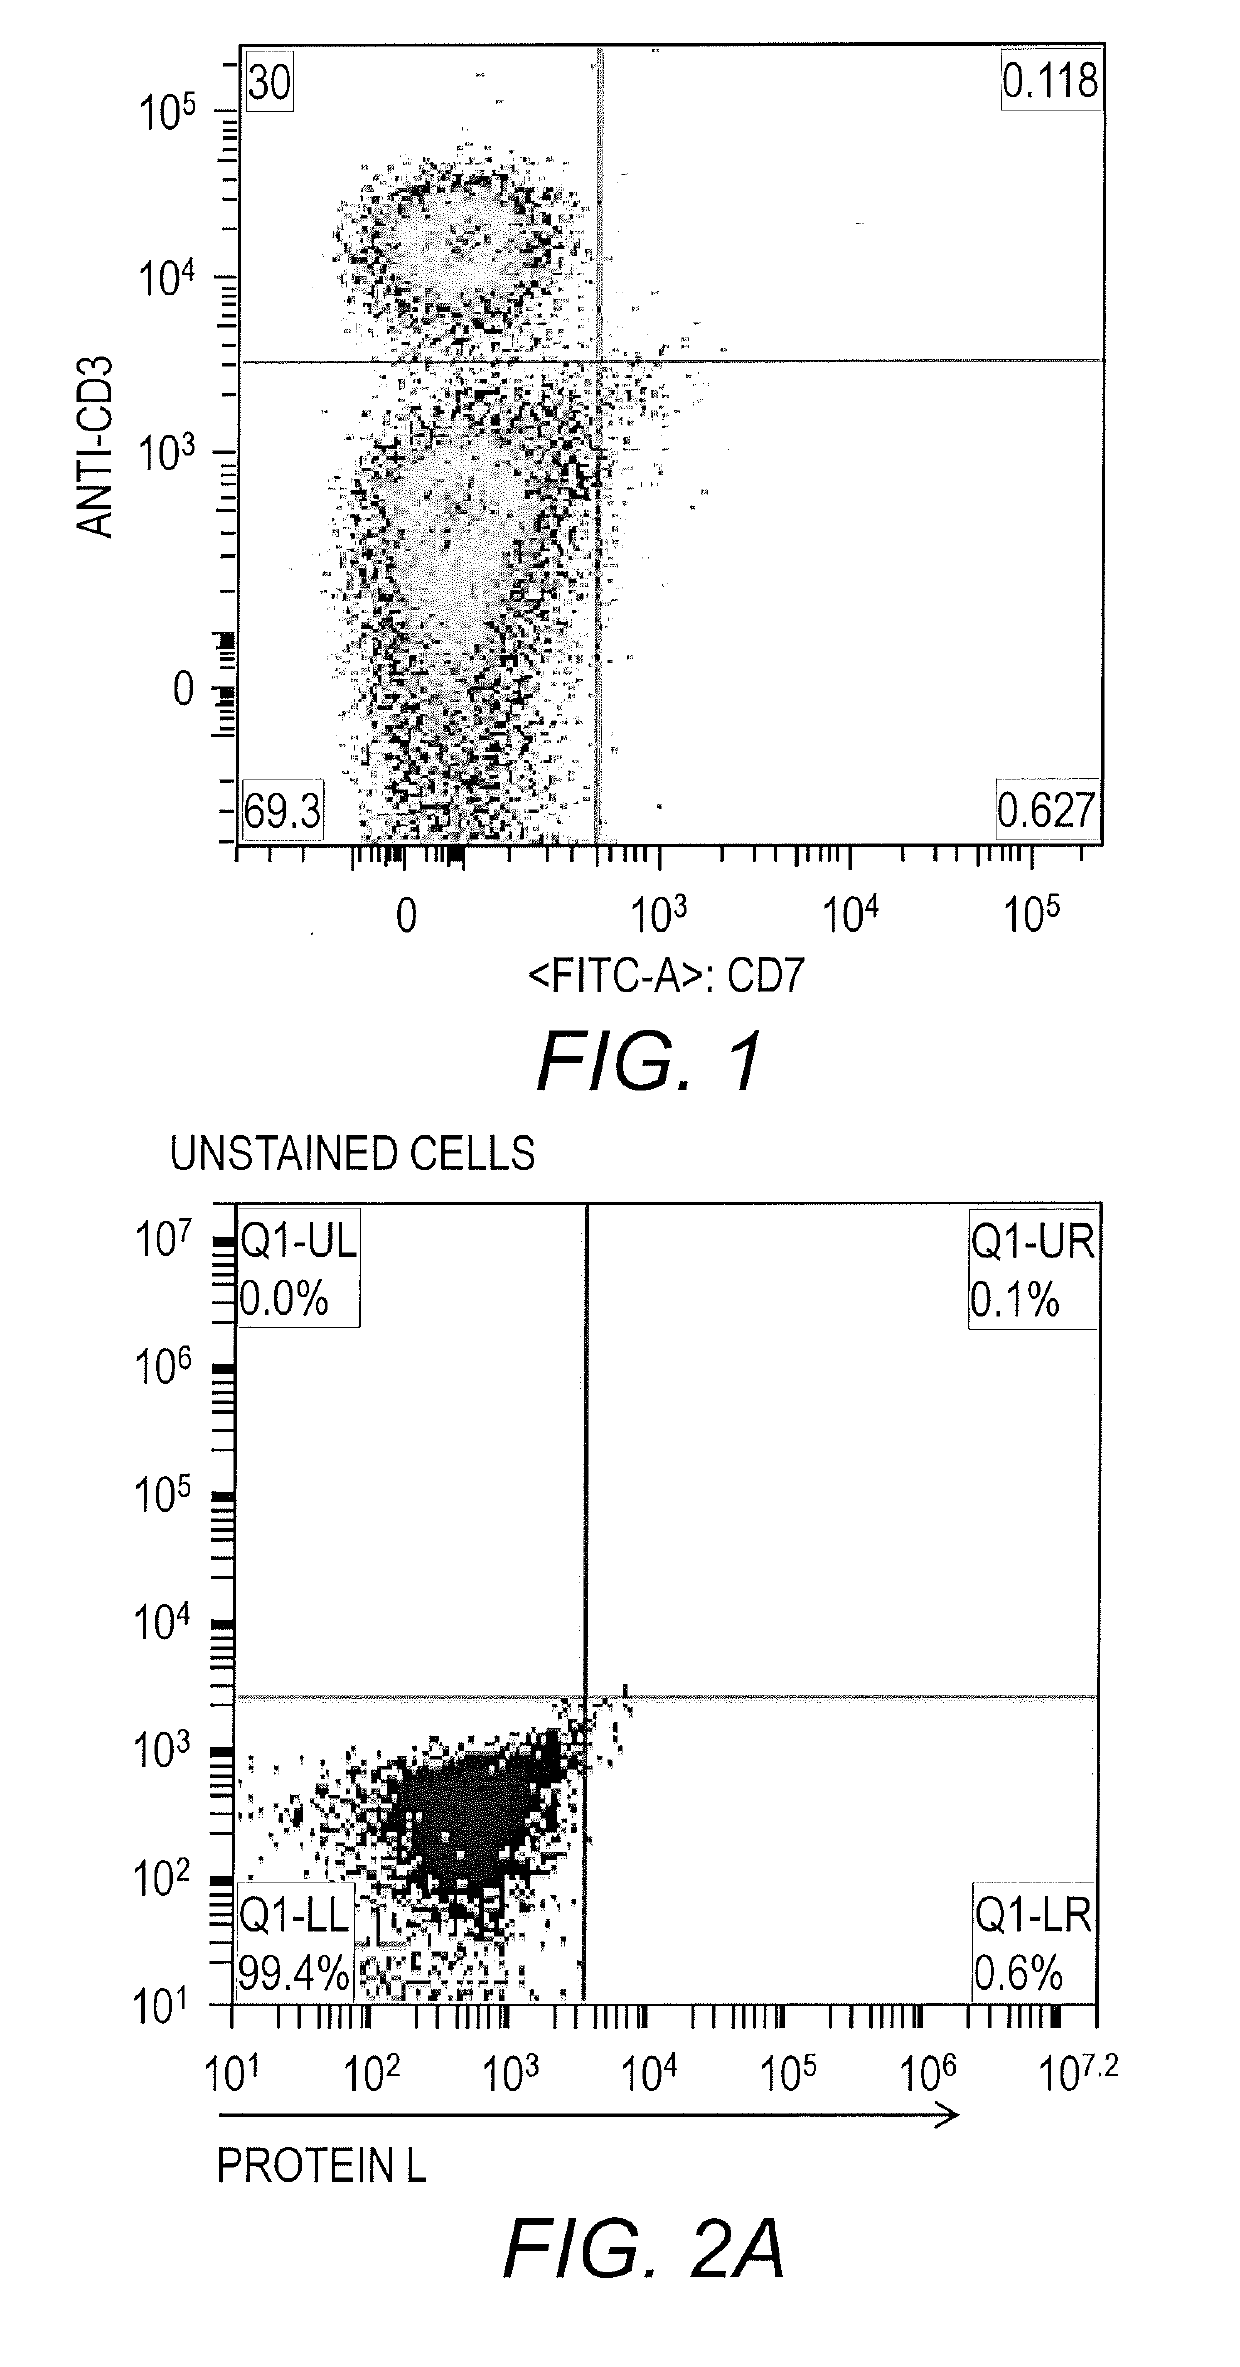 Anti-cd7 chimeric antigen receptor and method of use thereof